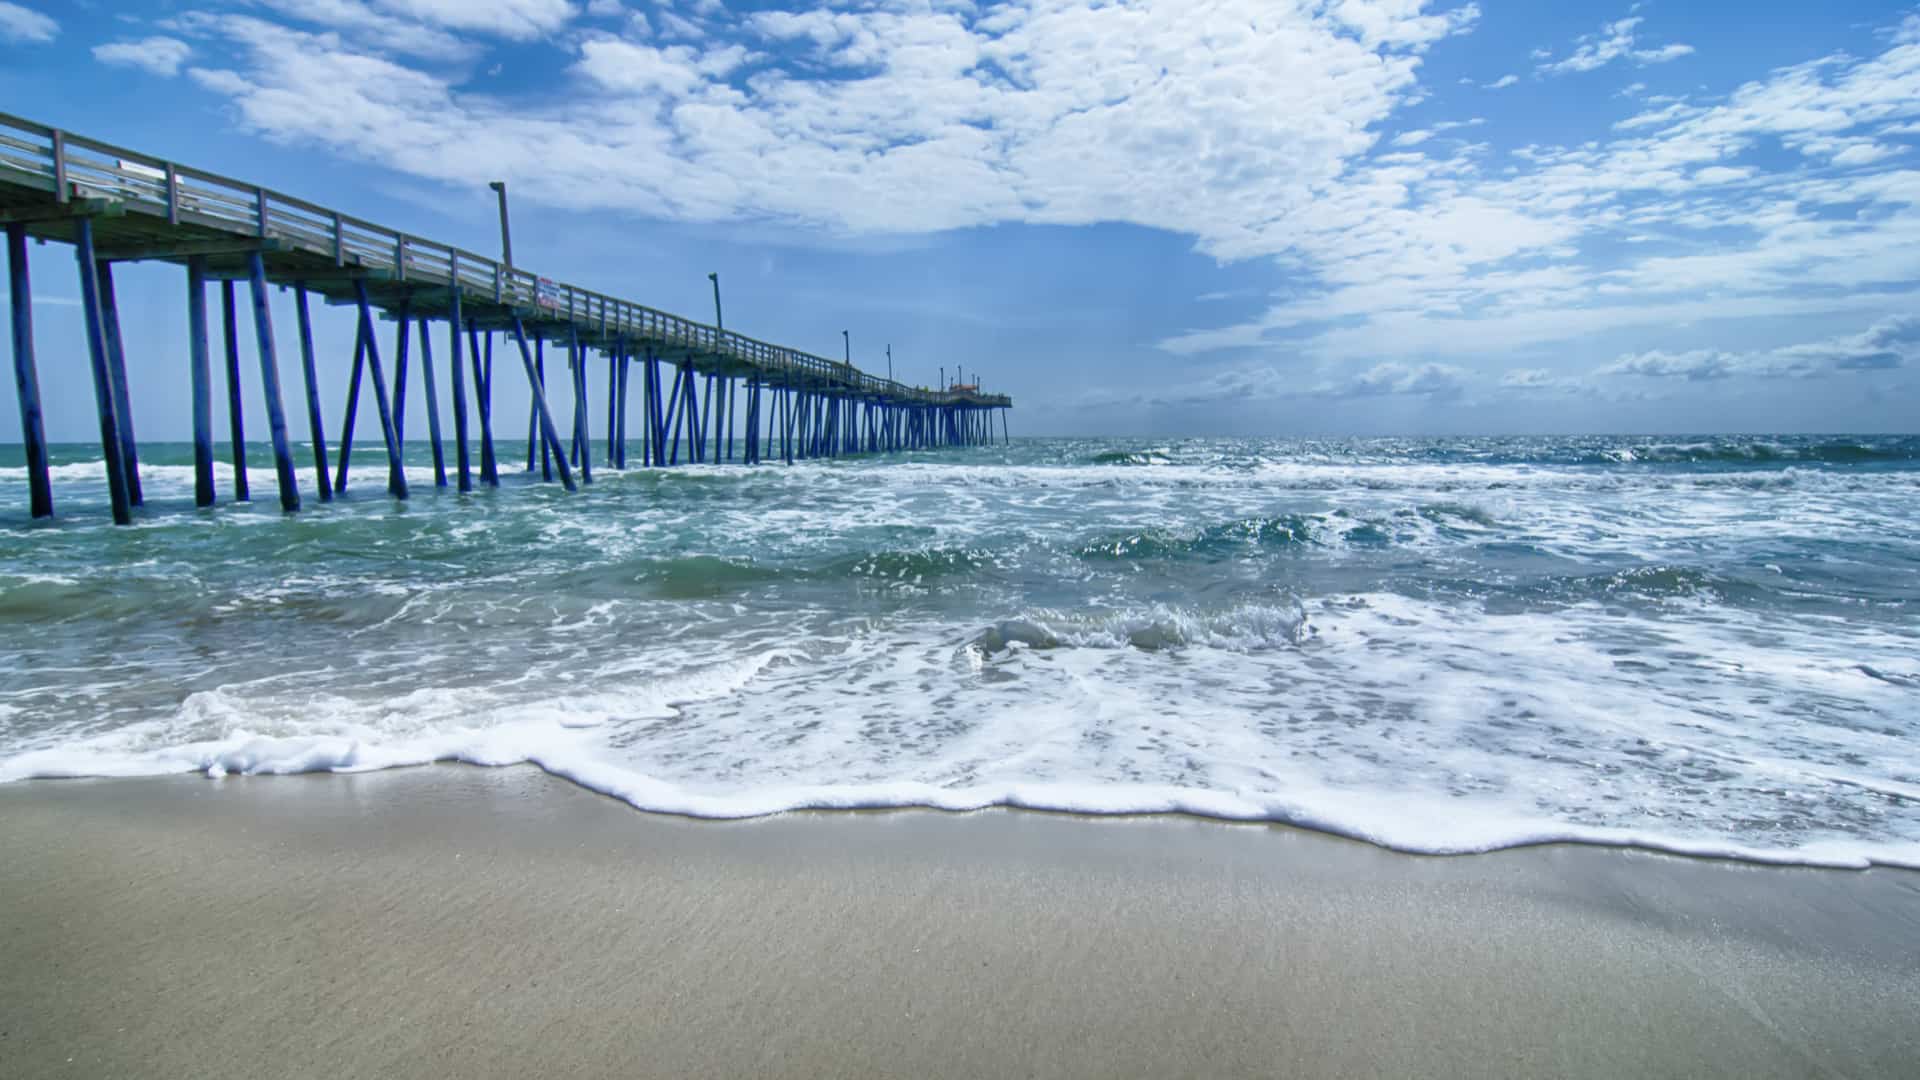 Fishing Pier in the outer banks